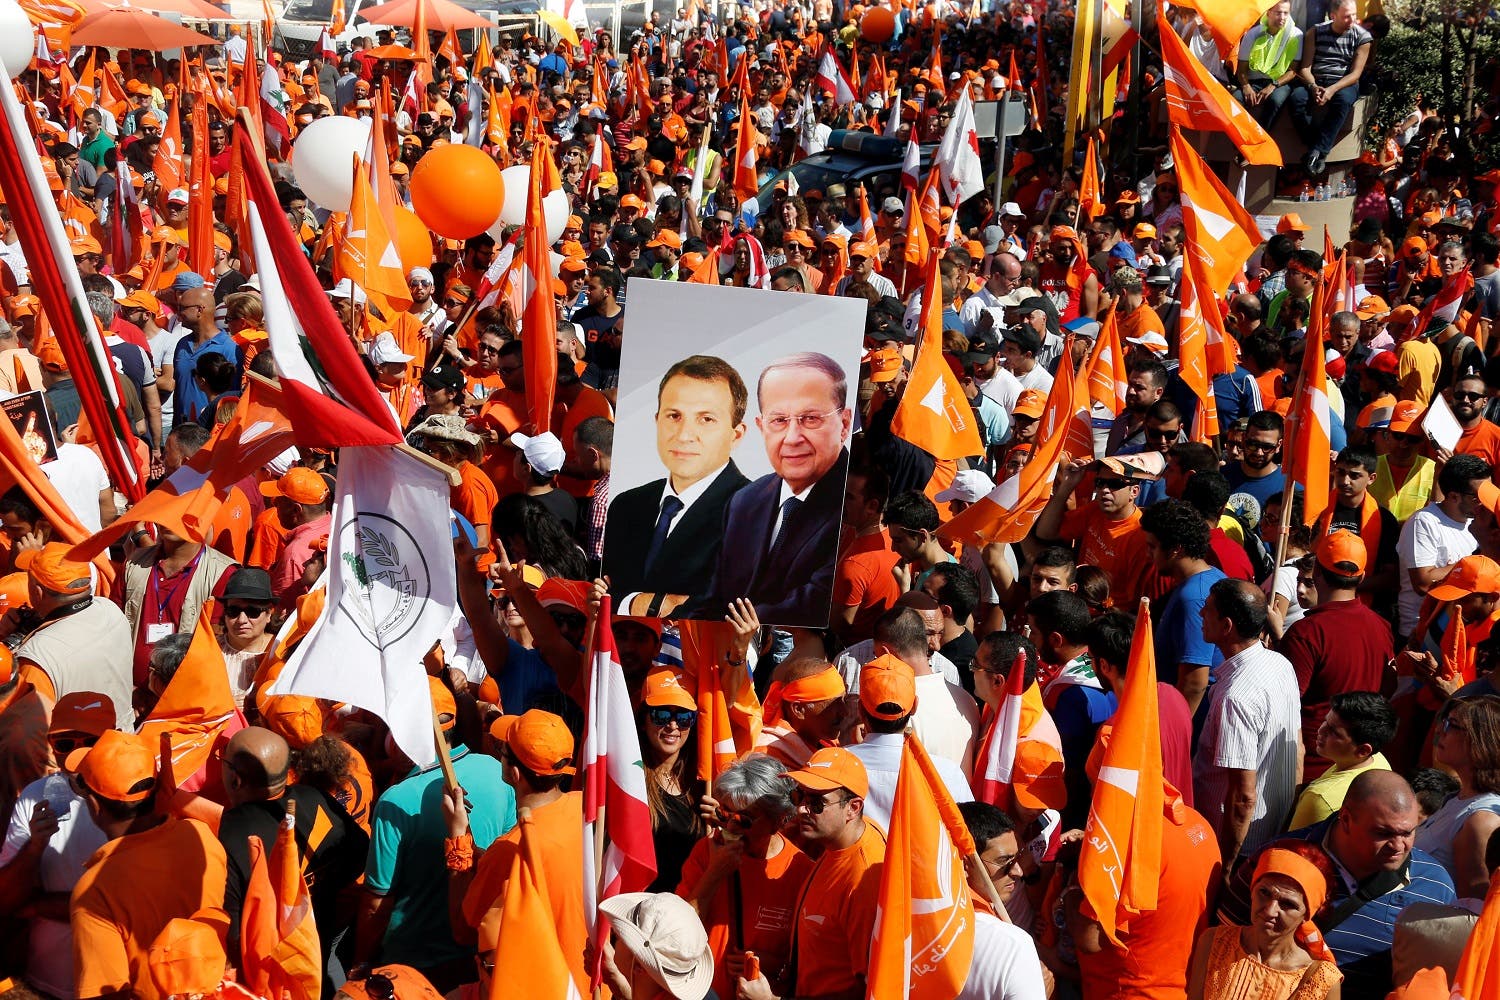 Supporters of the Free Patriotic Movement (FPM) carry flags and a picture of Christian politician and FPM founder Michel Aoun in October 2016. (File photo: Reuters)